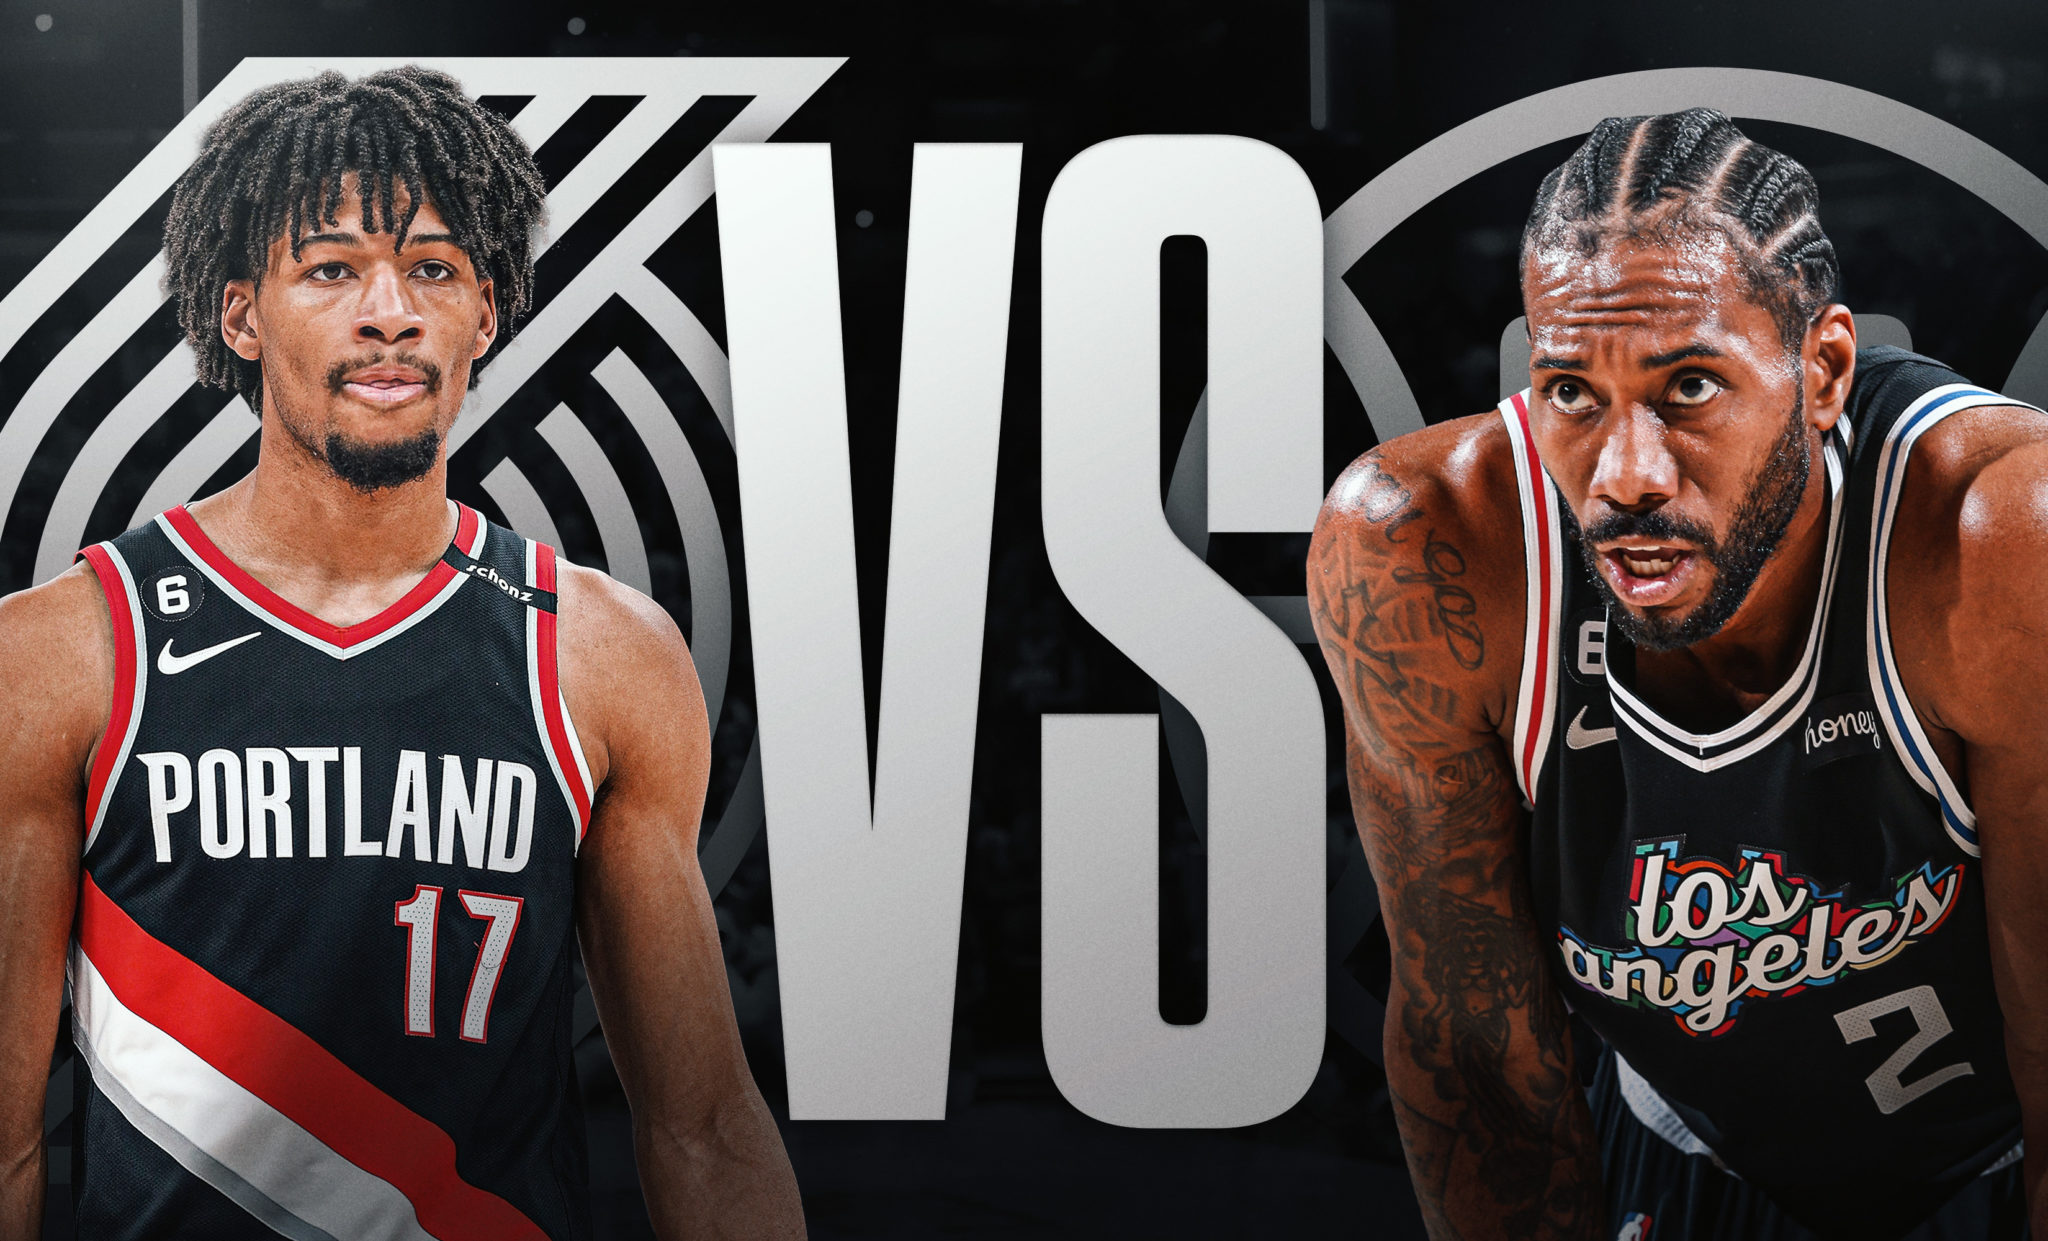 Must Win For Clippers: Clippers vs. Trailblazers Preview, Odds & Predictions